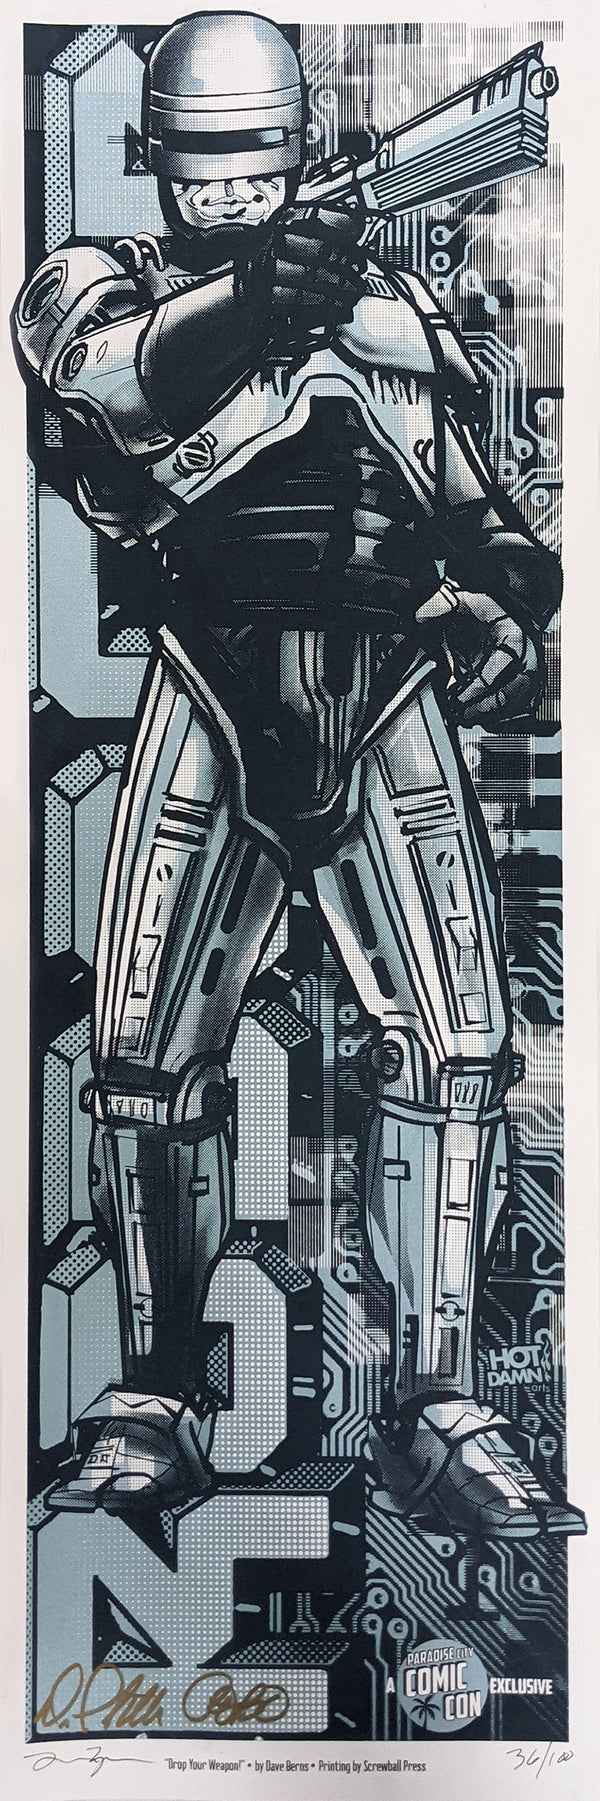 RoboCop 10x30 Lithograph Art Print signed by Dave Berns and Peter Weller